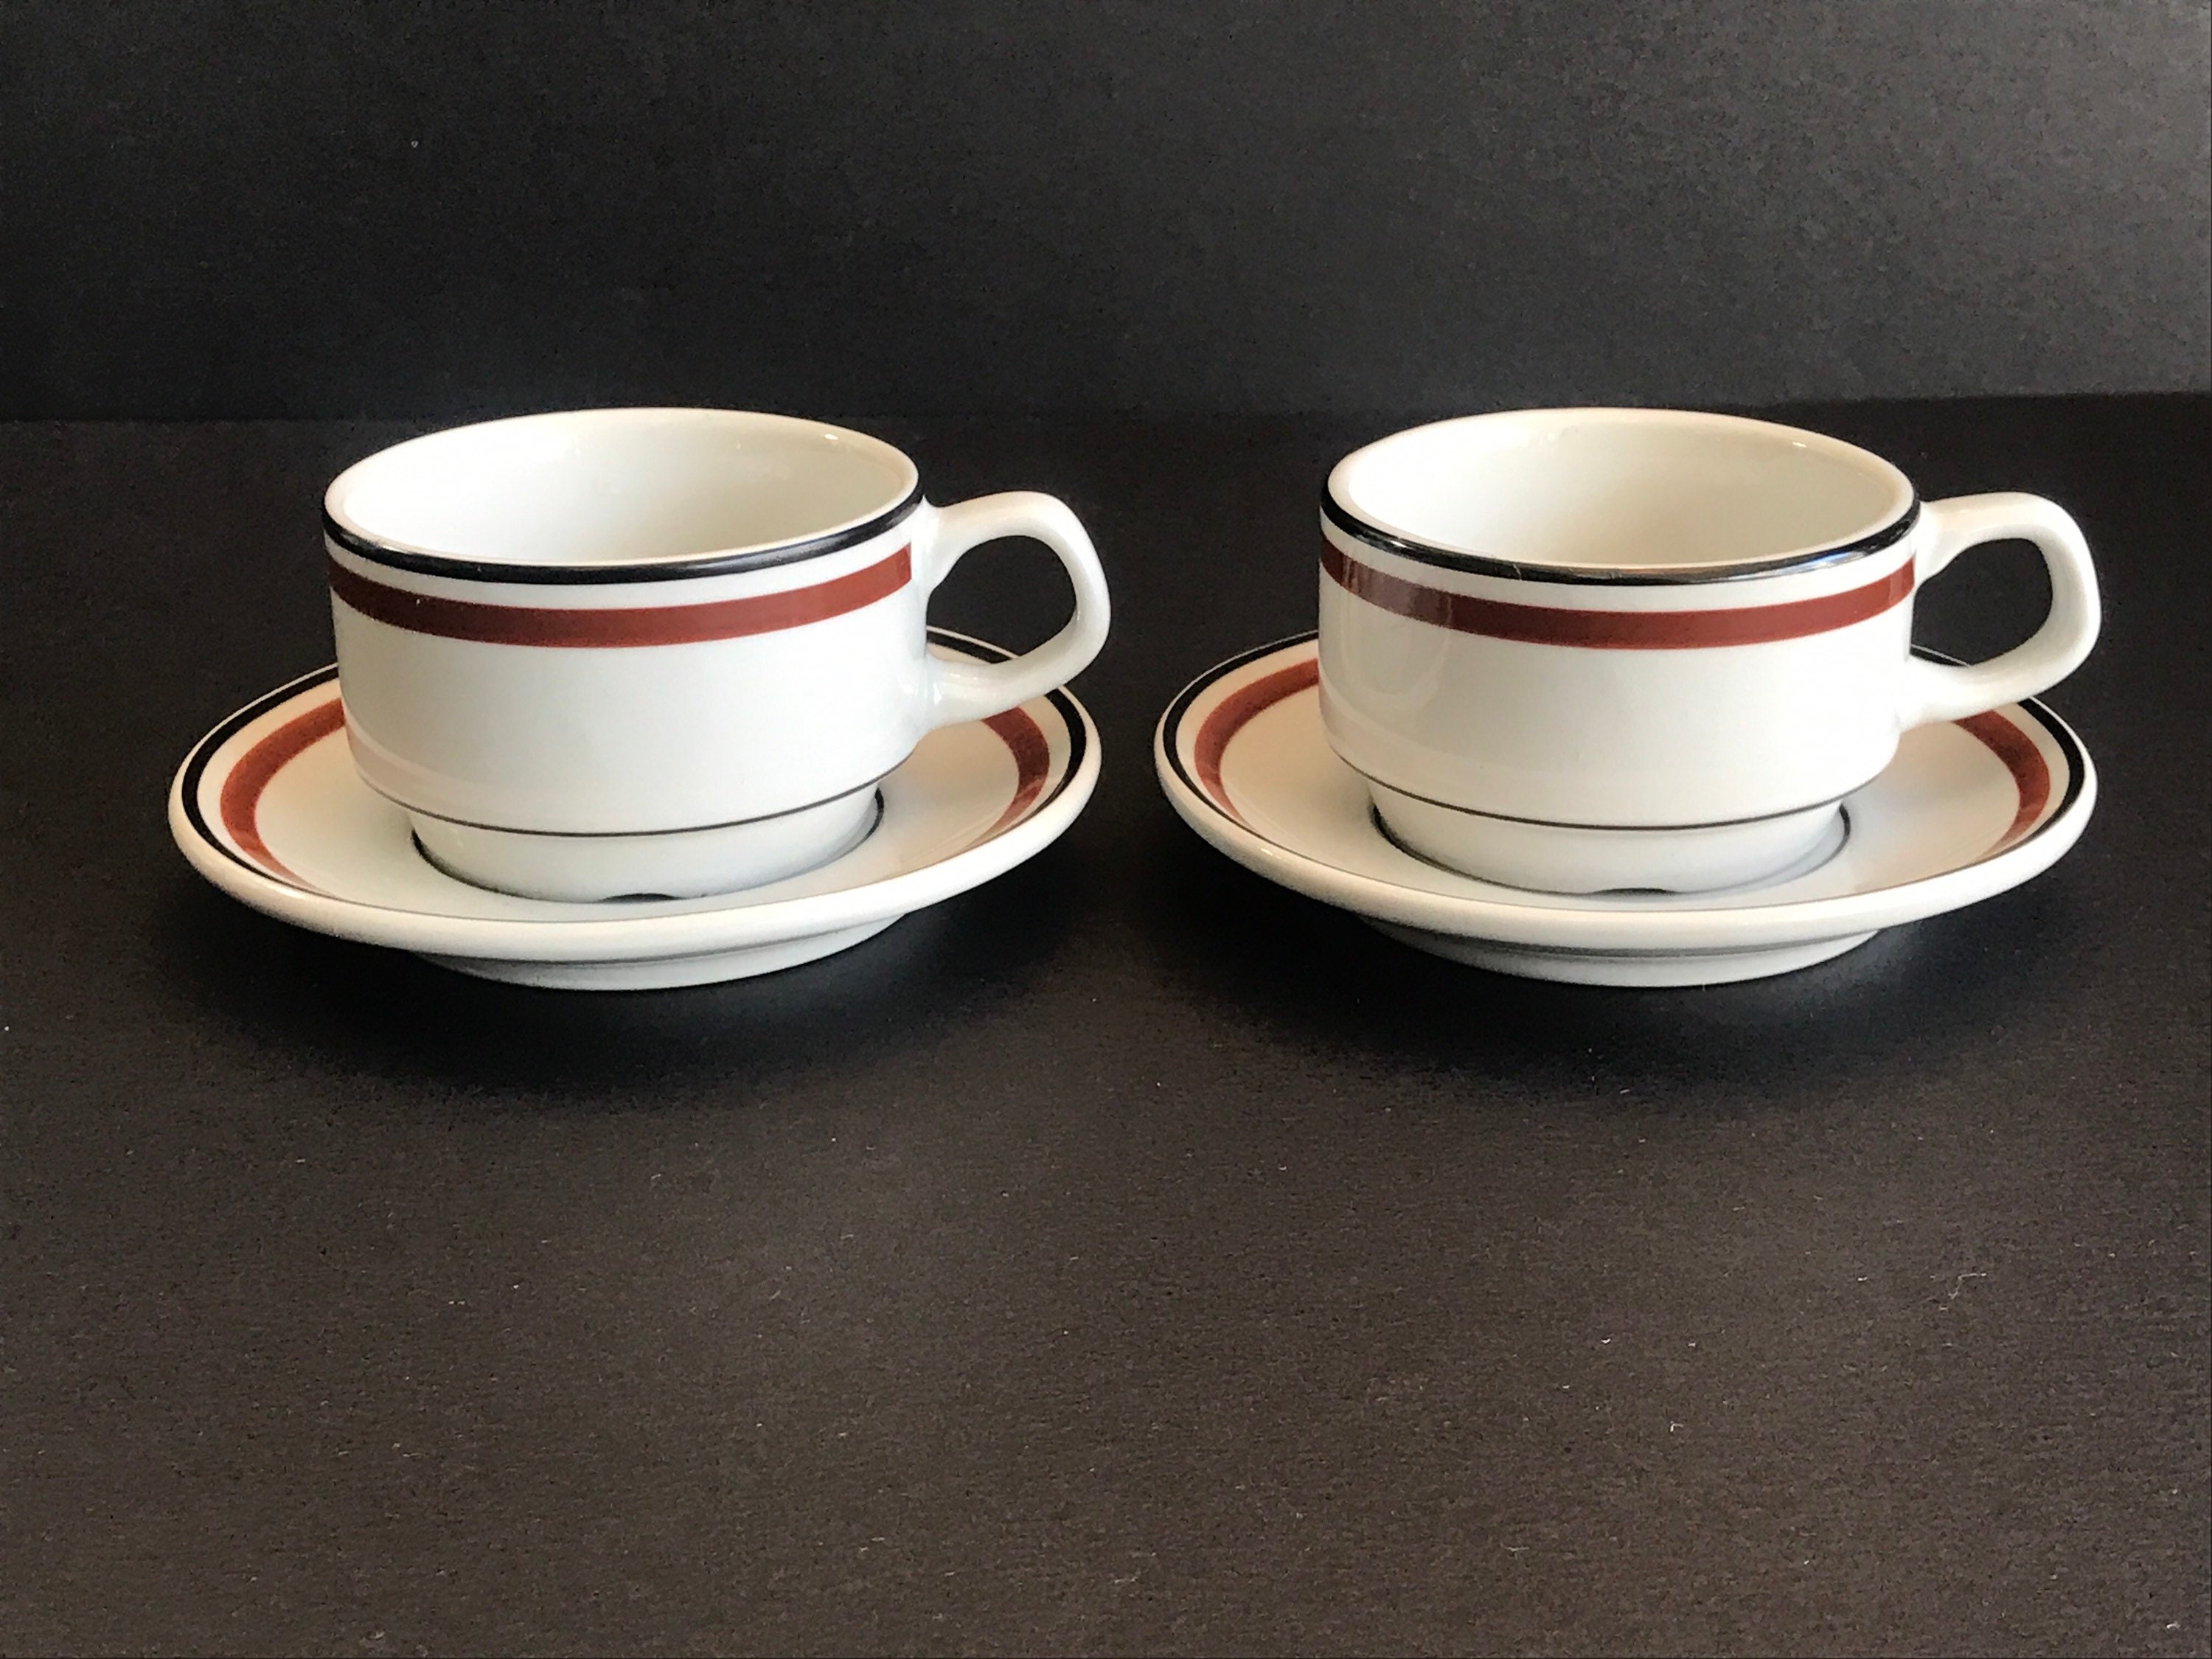 LE TAUCI 8 oz Cappuccino Cups with Saucers Ceramic Large Coffee Cup for Au  Lait, Double shot, Latte,…See more LE TAUCI 8 oz Cappuccino Cups with